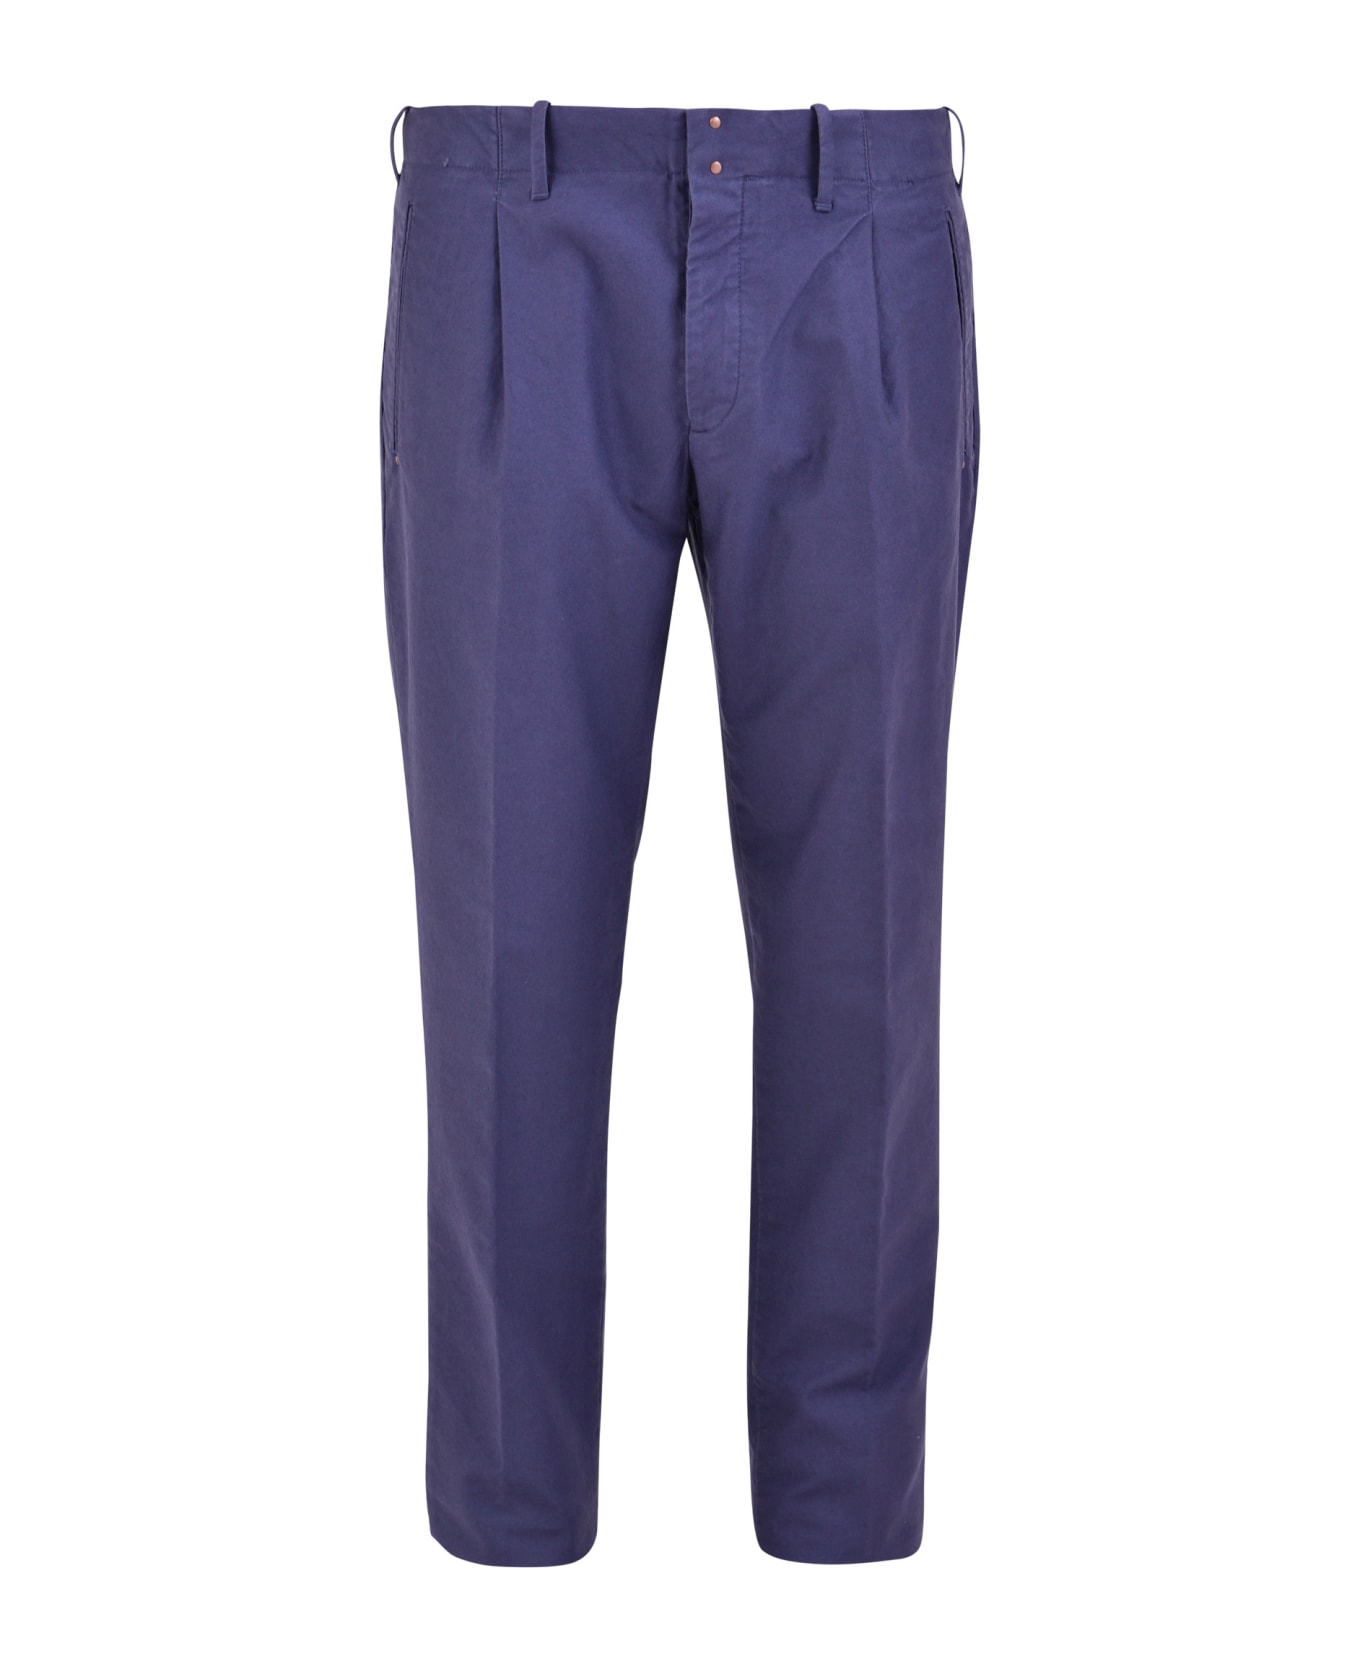 Incotex Drill Cotton Trousers - Blue ボトムス